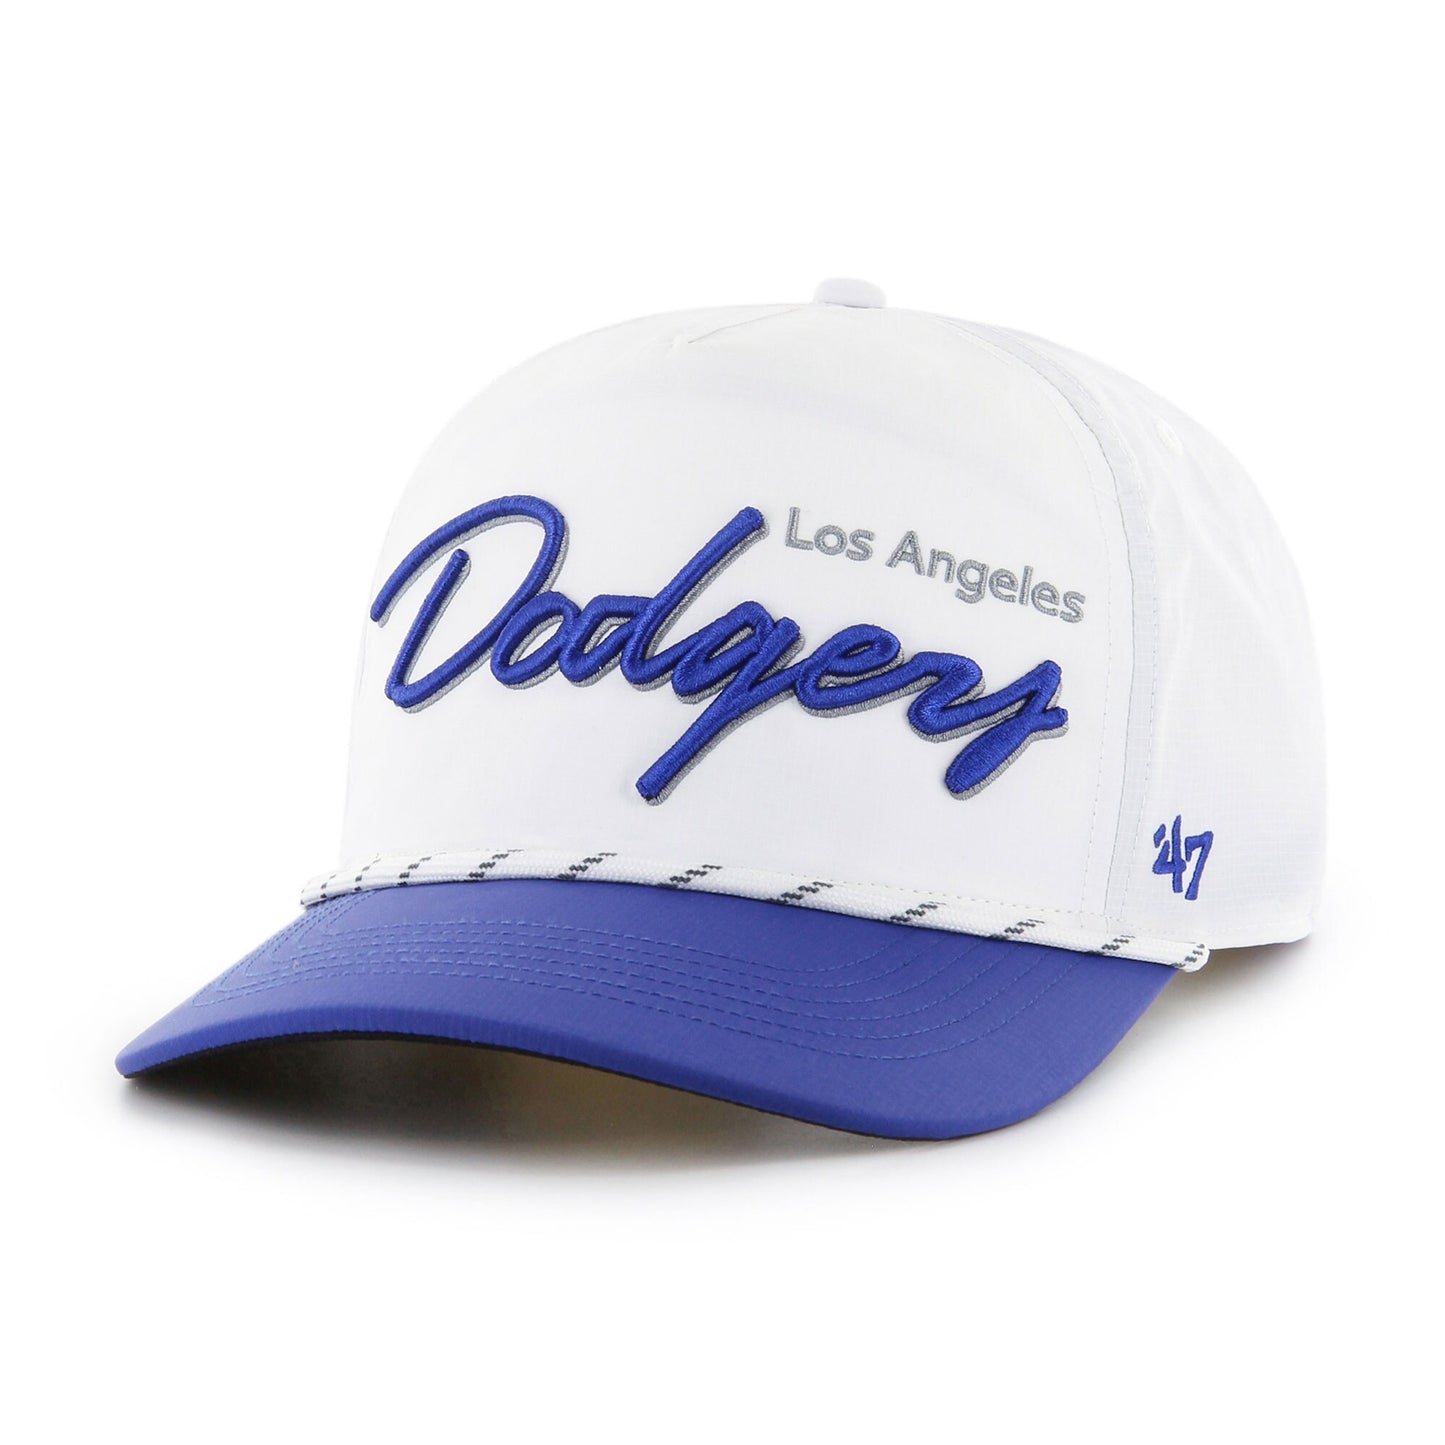 Los Angeles Dodgers '47 Chamberlain Hitch Adjustable Hat - White